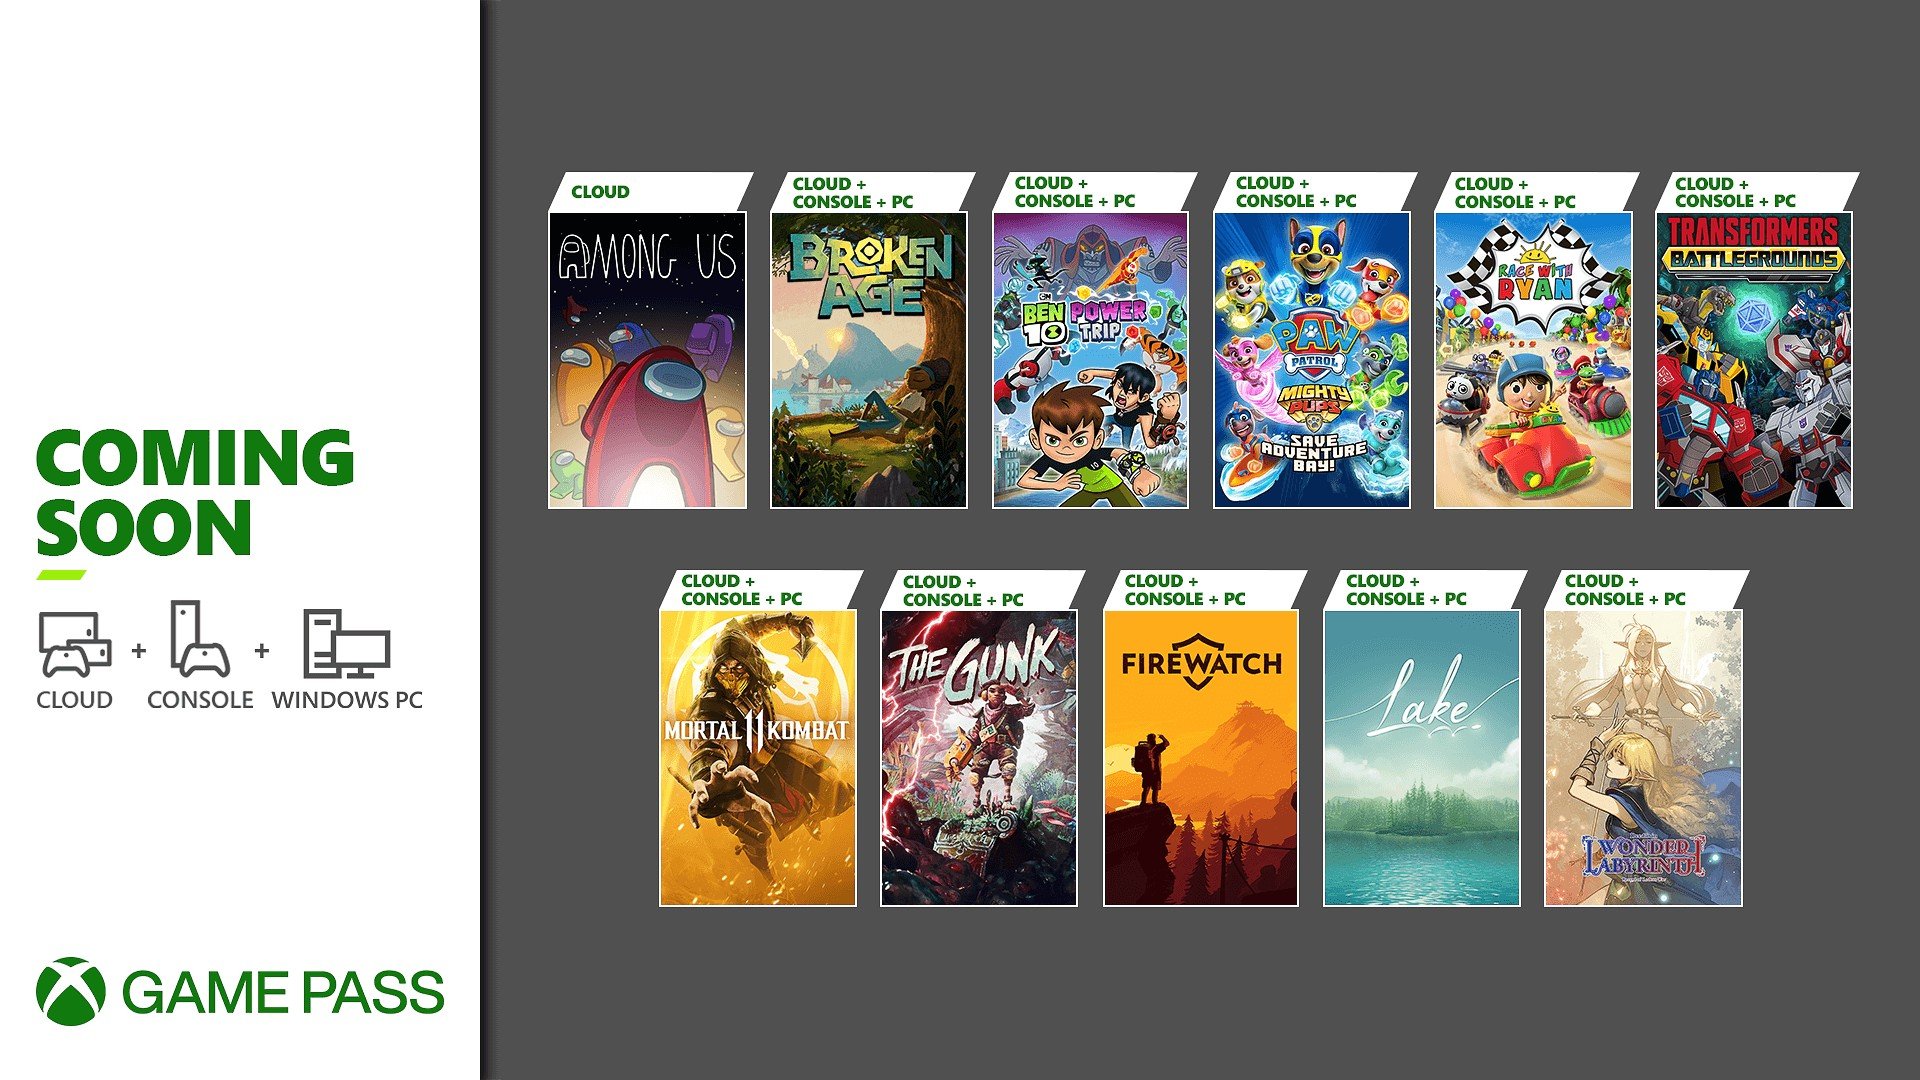 Xbox Game Pass December Update All The New Games Coming To or Leaving XGP